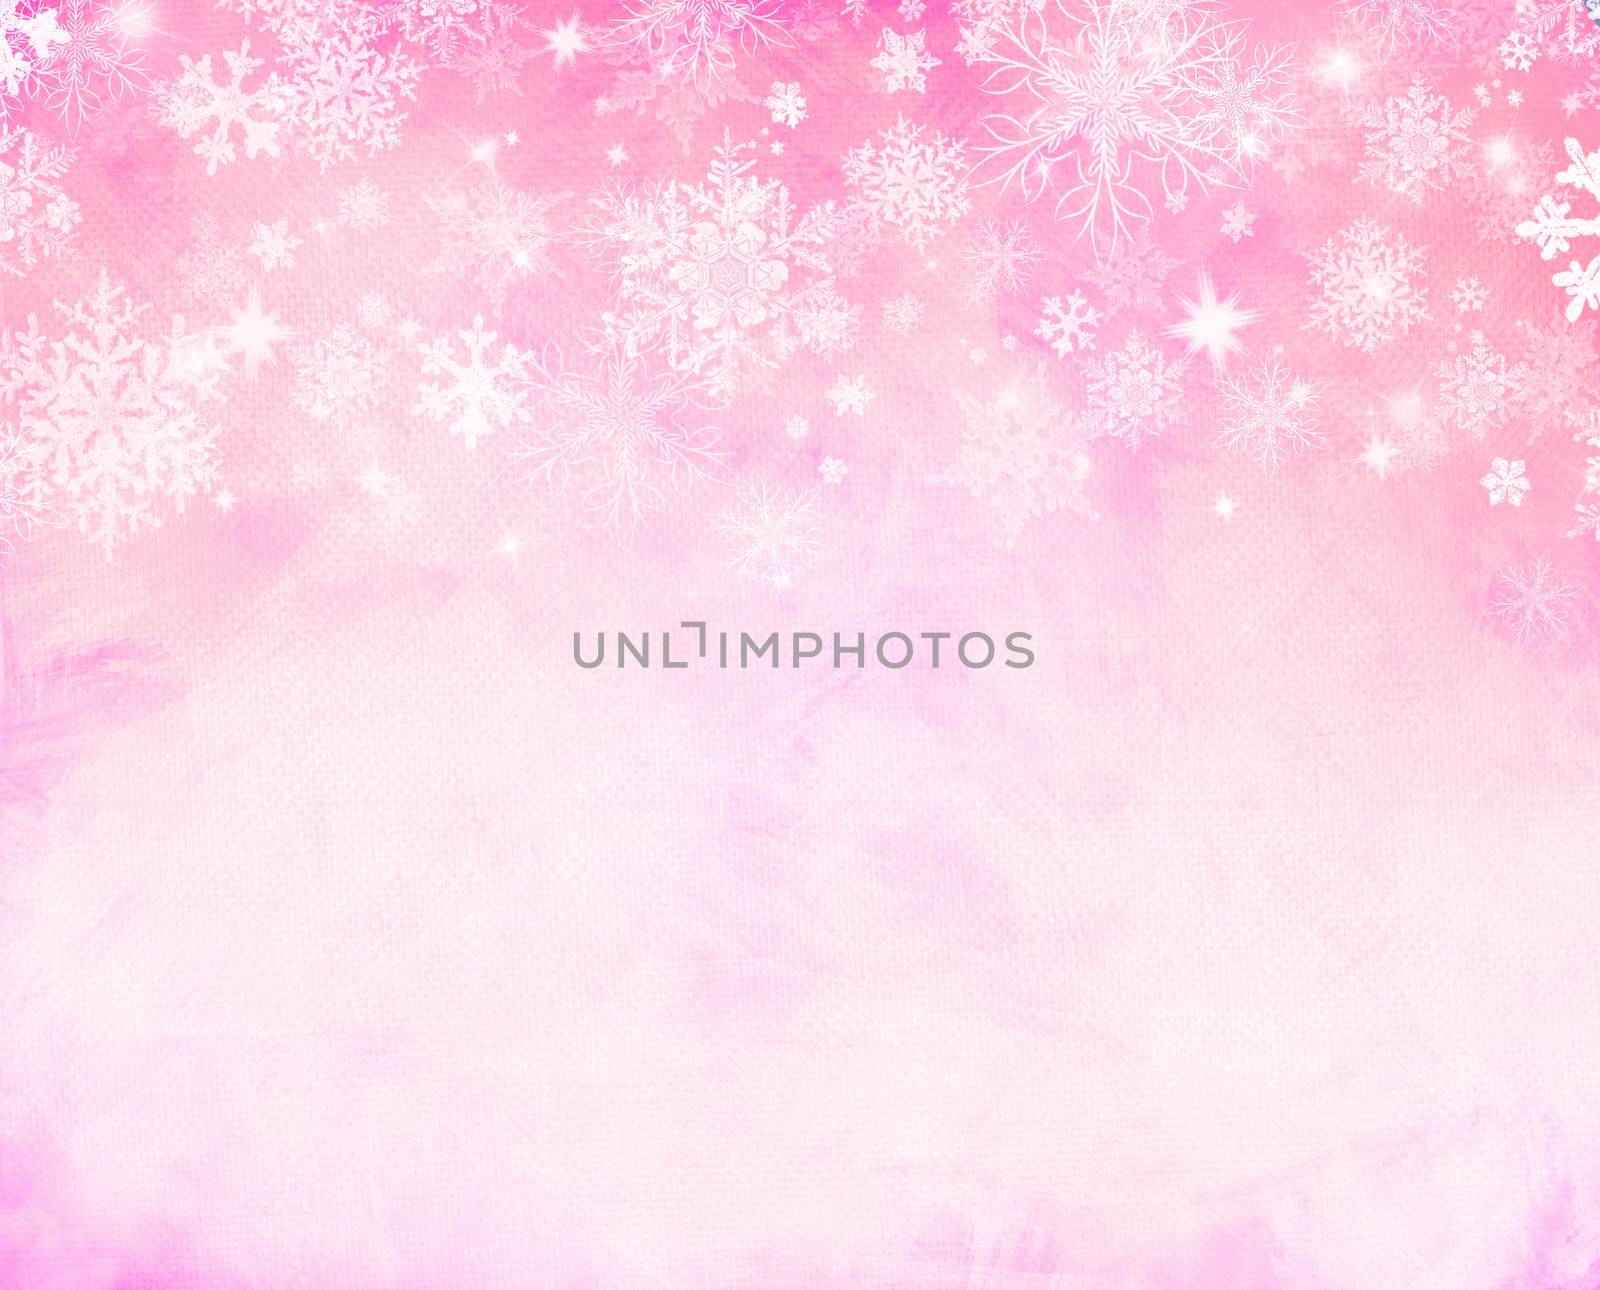 Abstract pink winter background. Christmas design with elegant snowflakes and glitter.